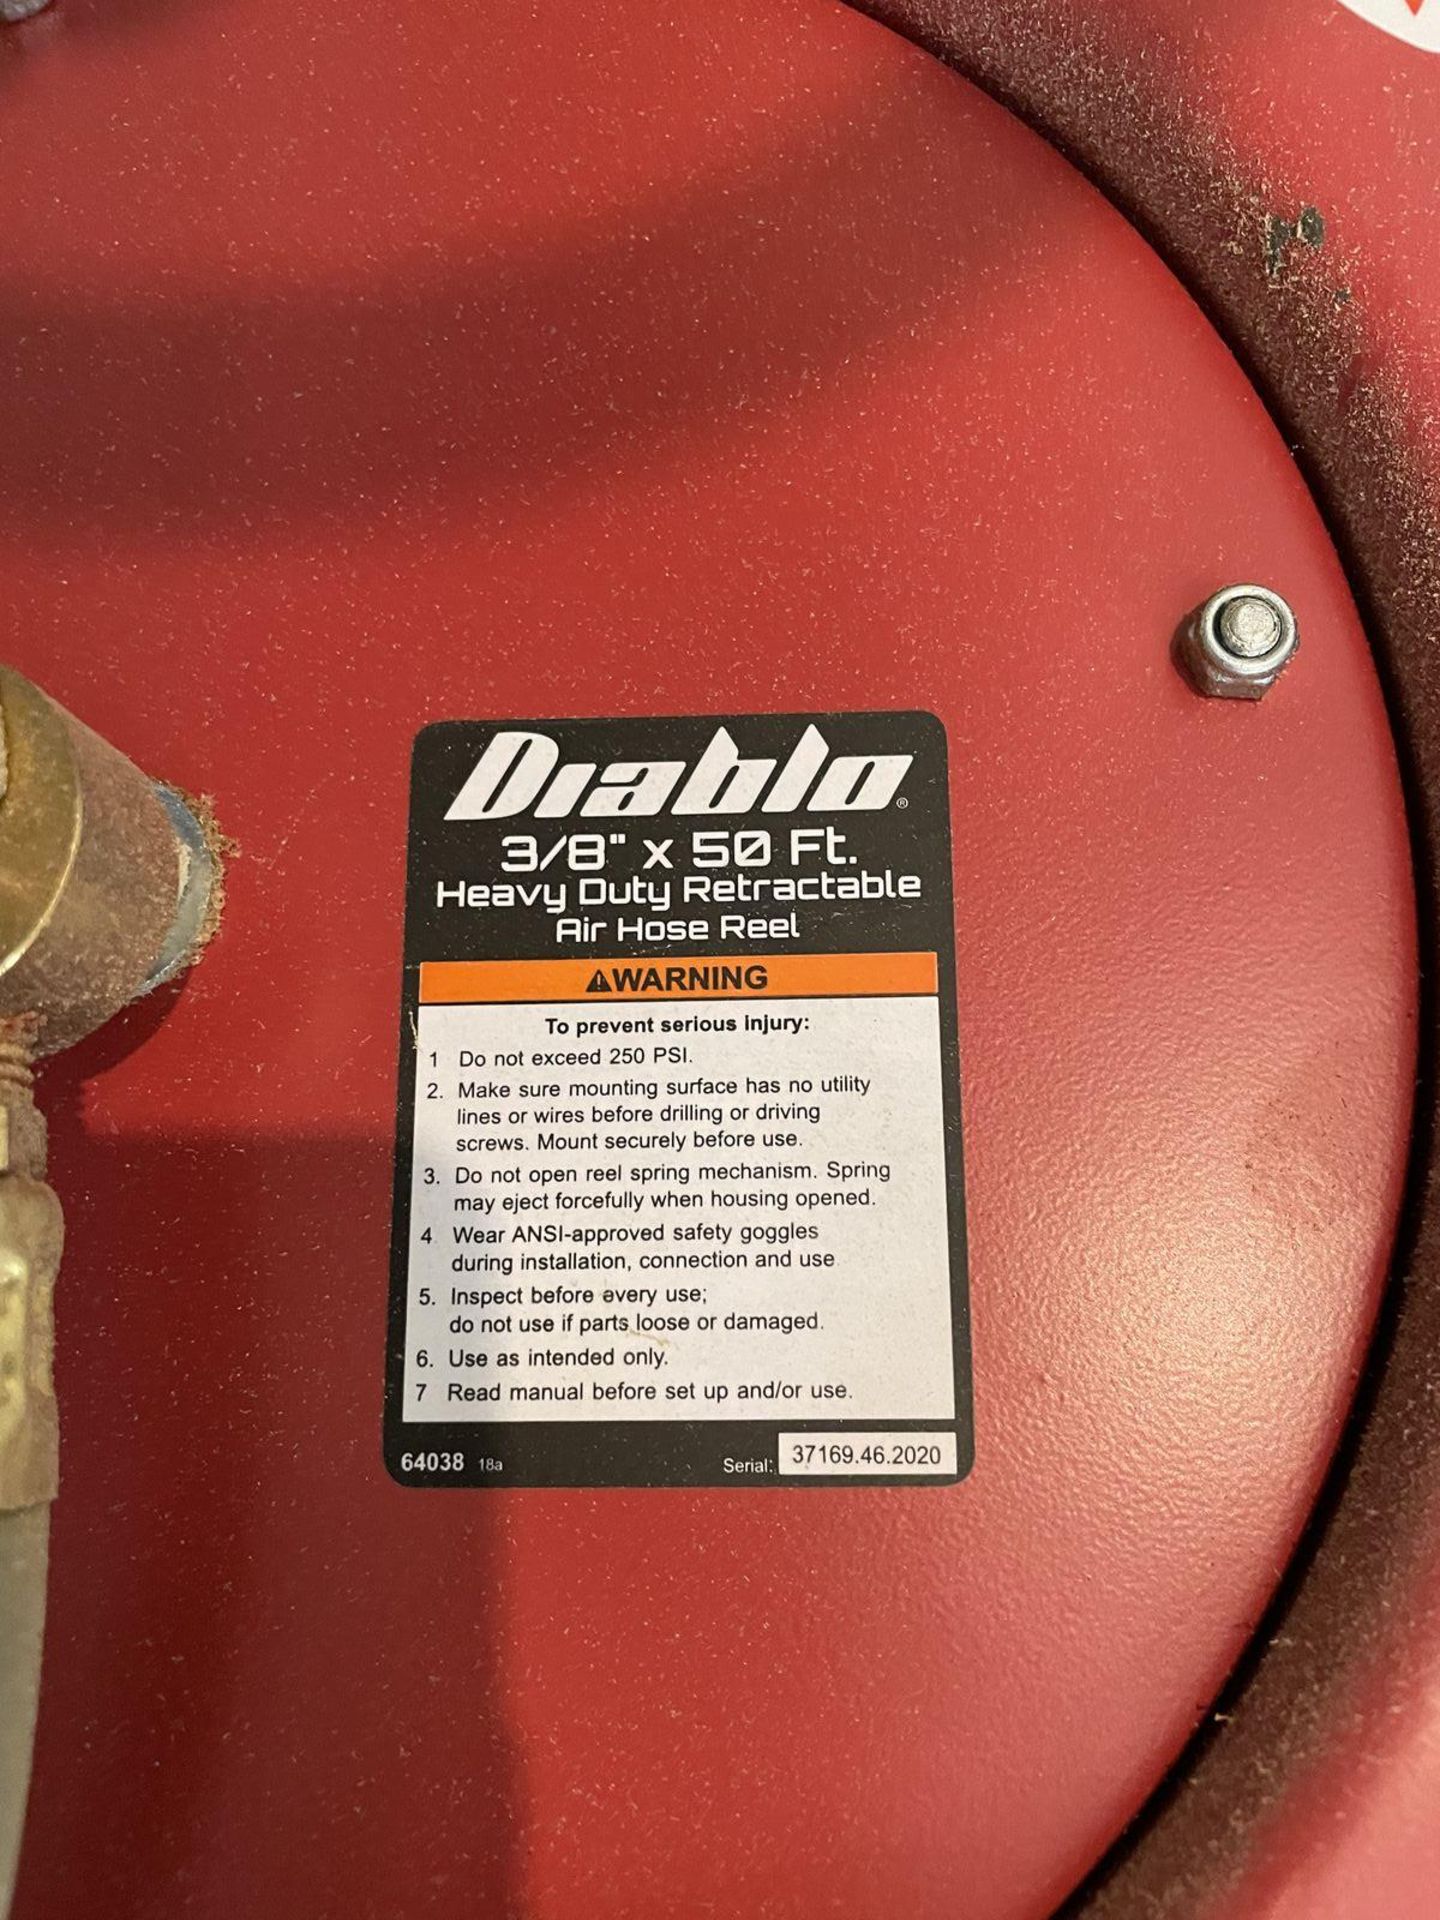 Diablo 3/8" x 50' Heavy Duty Retractable Air Hose Reel with Central Pneumatic Air Filter - Image 2 of 3